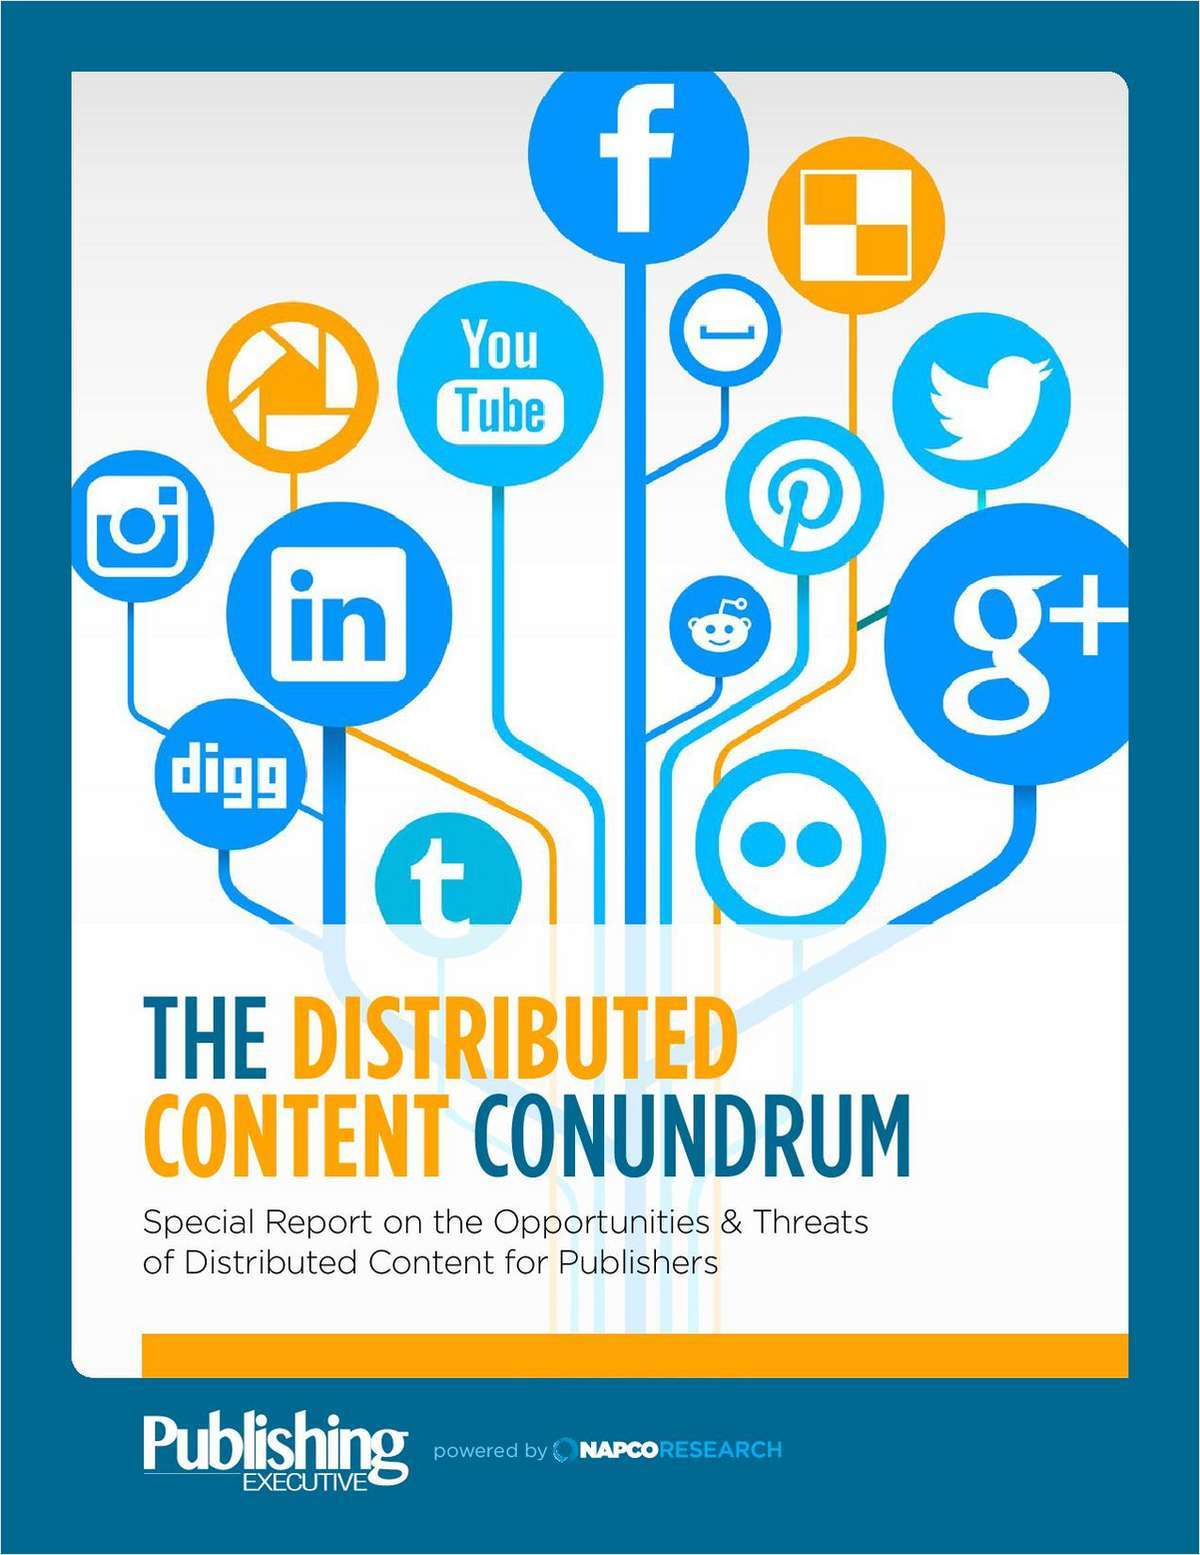 Special Report: The Distributed Content Conundrum